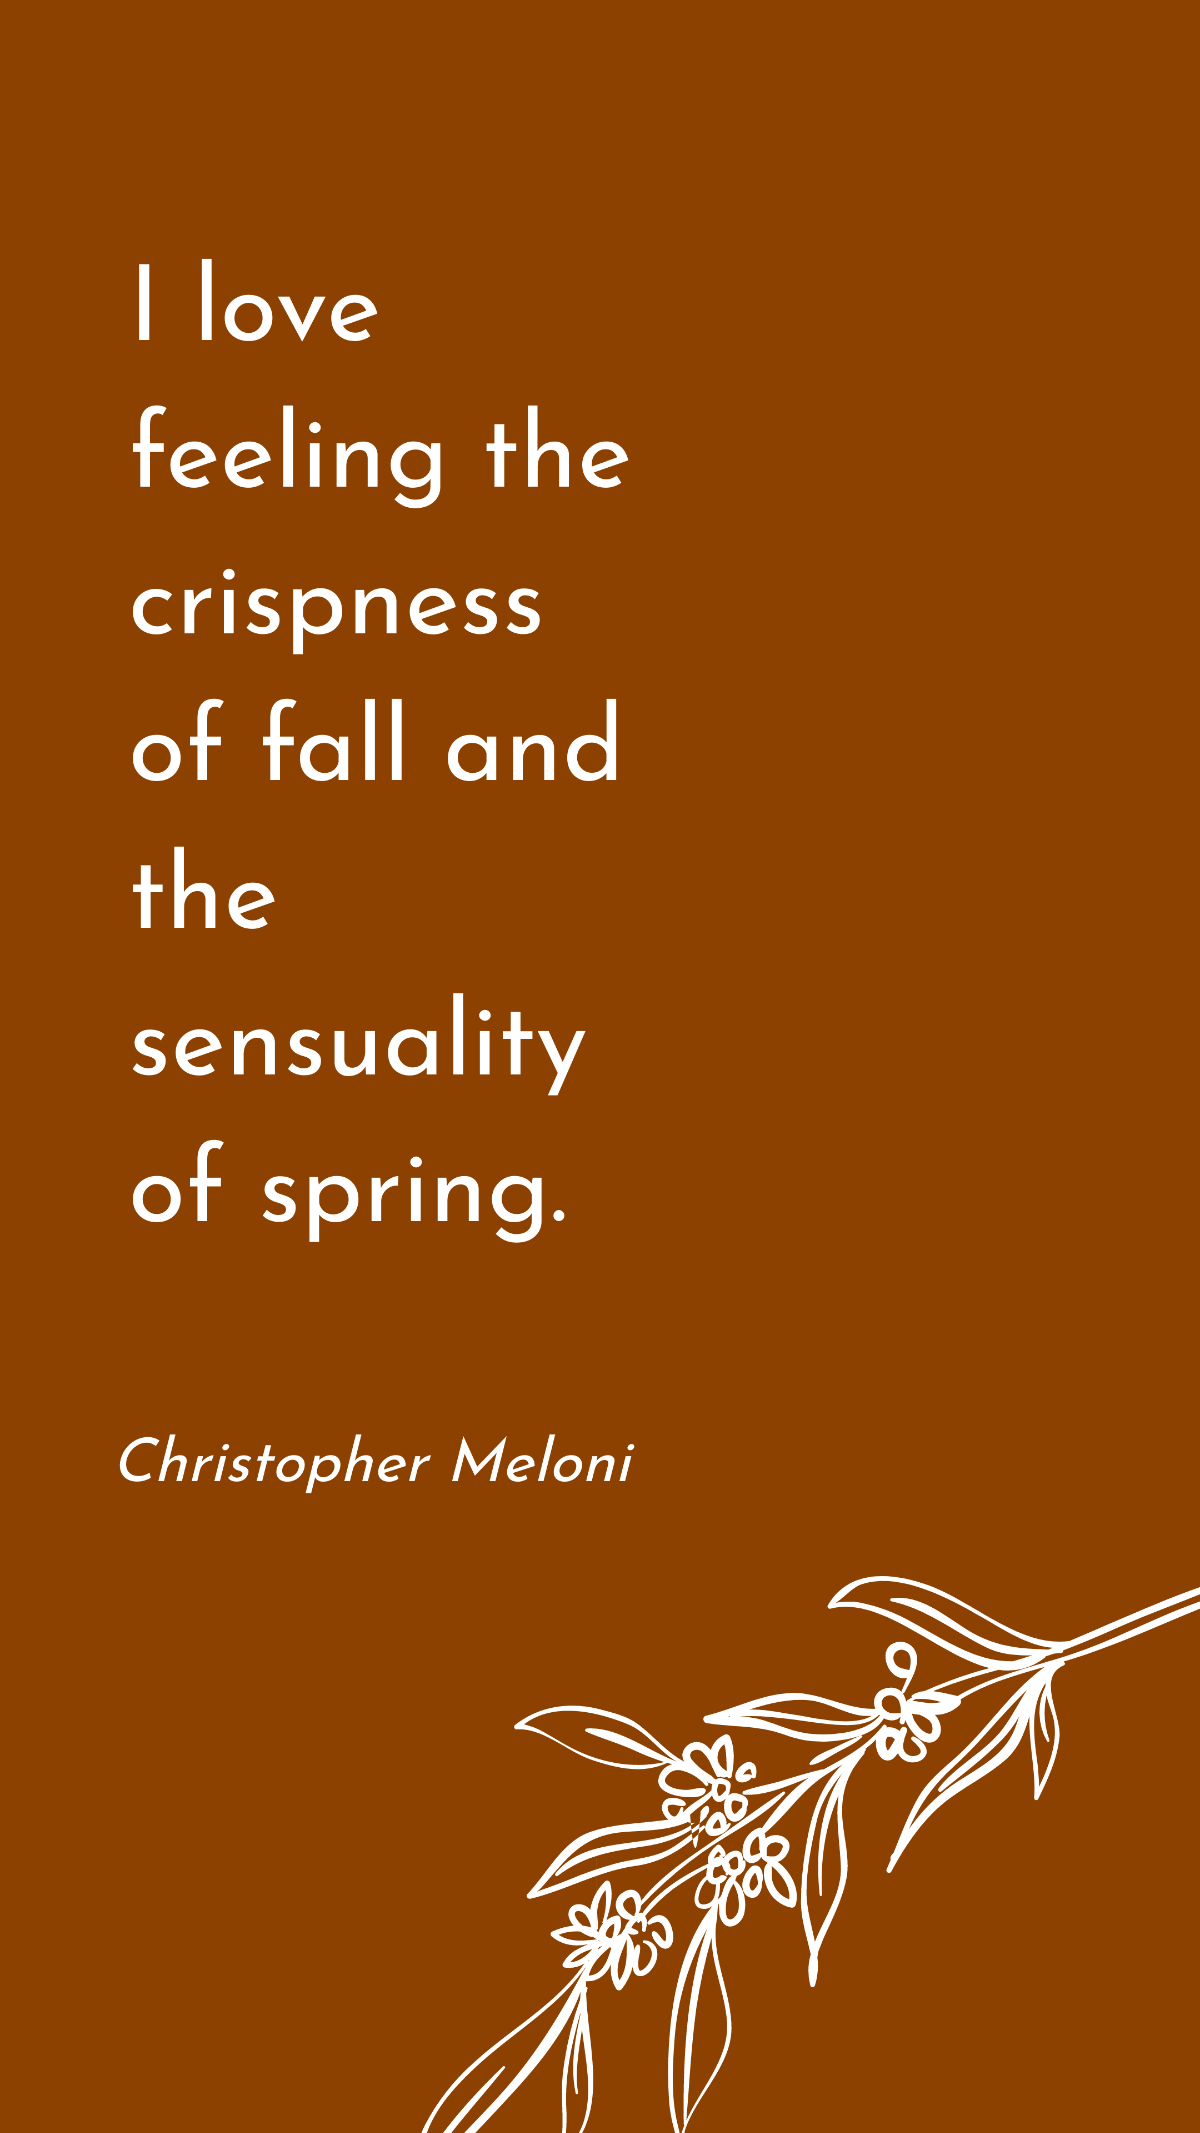 Christopher Meloni - I love feeling the crispness of fall and the sensuality of spring. Template